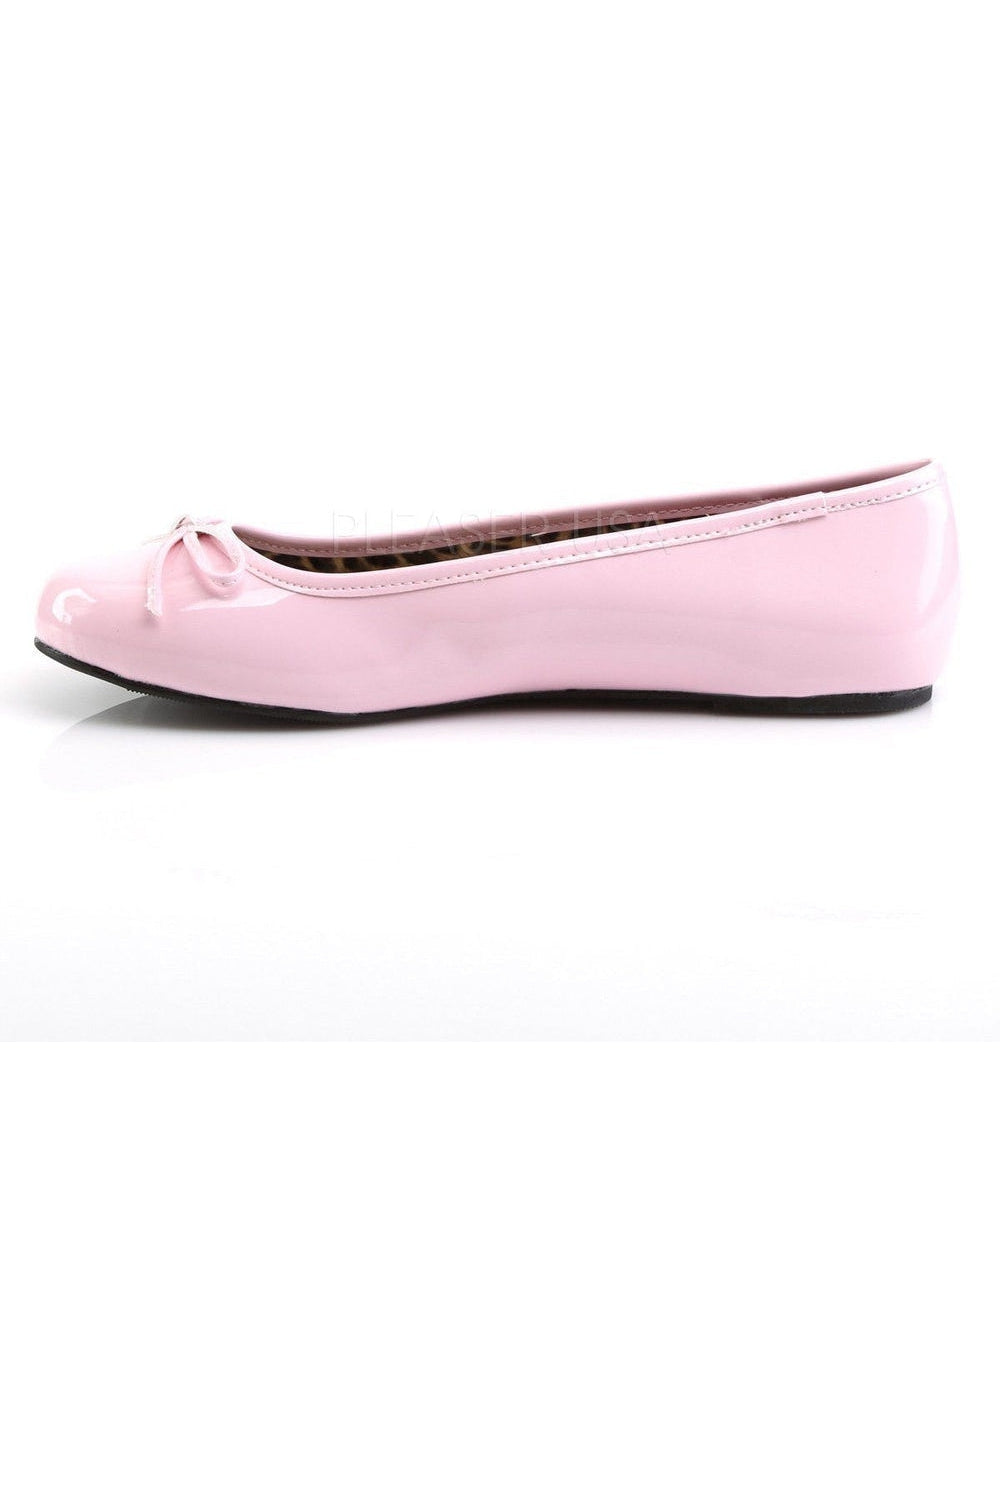 ANNA-01 Flat | Pink Patent-Pleaser Pink Label-Flats-SEXYSHOES.COM